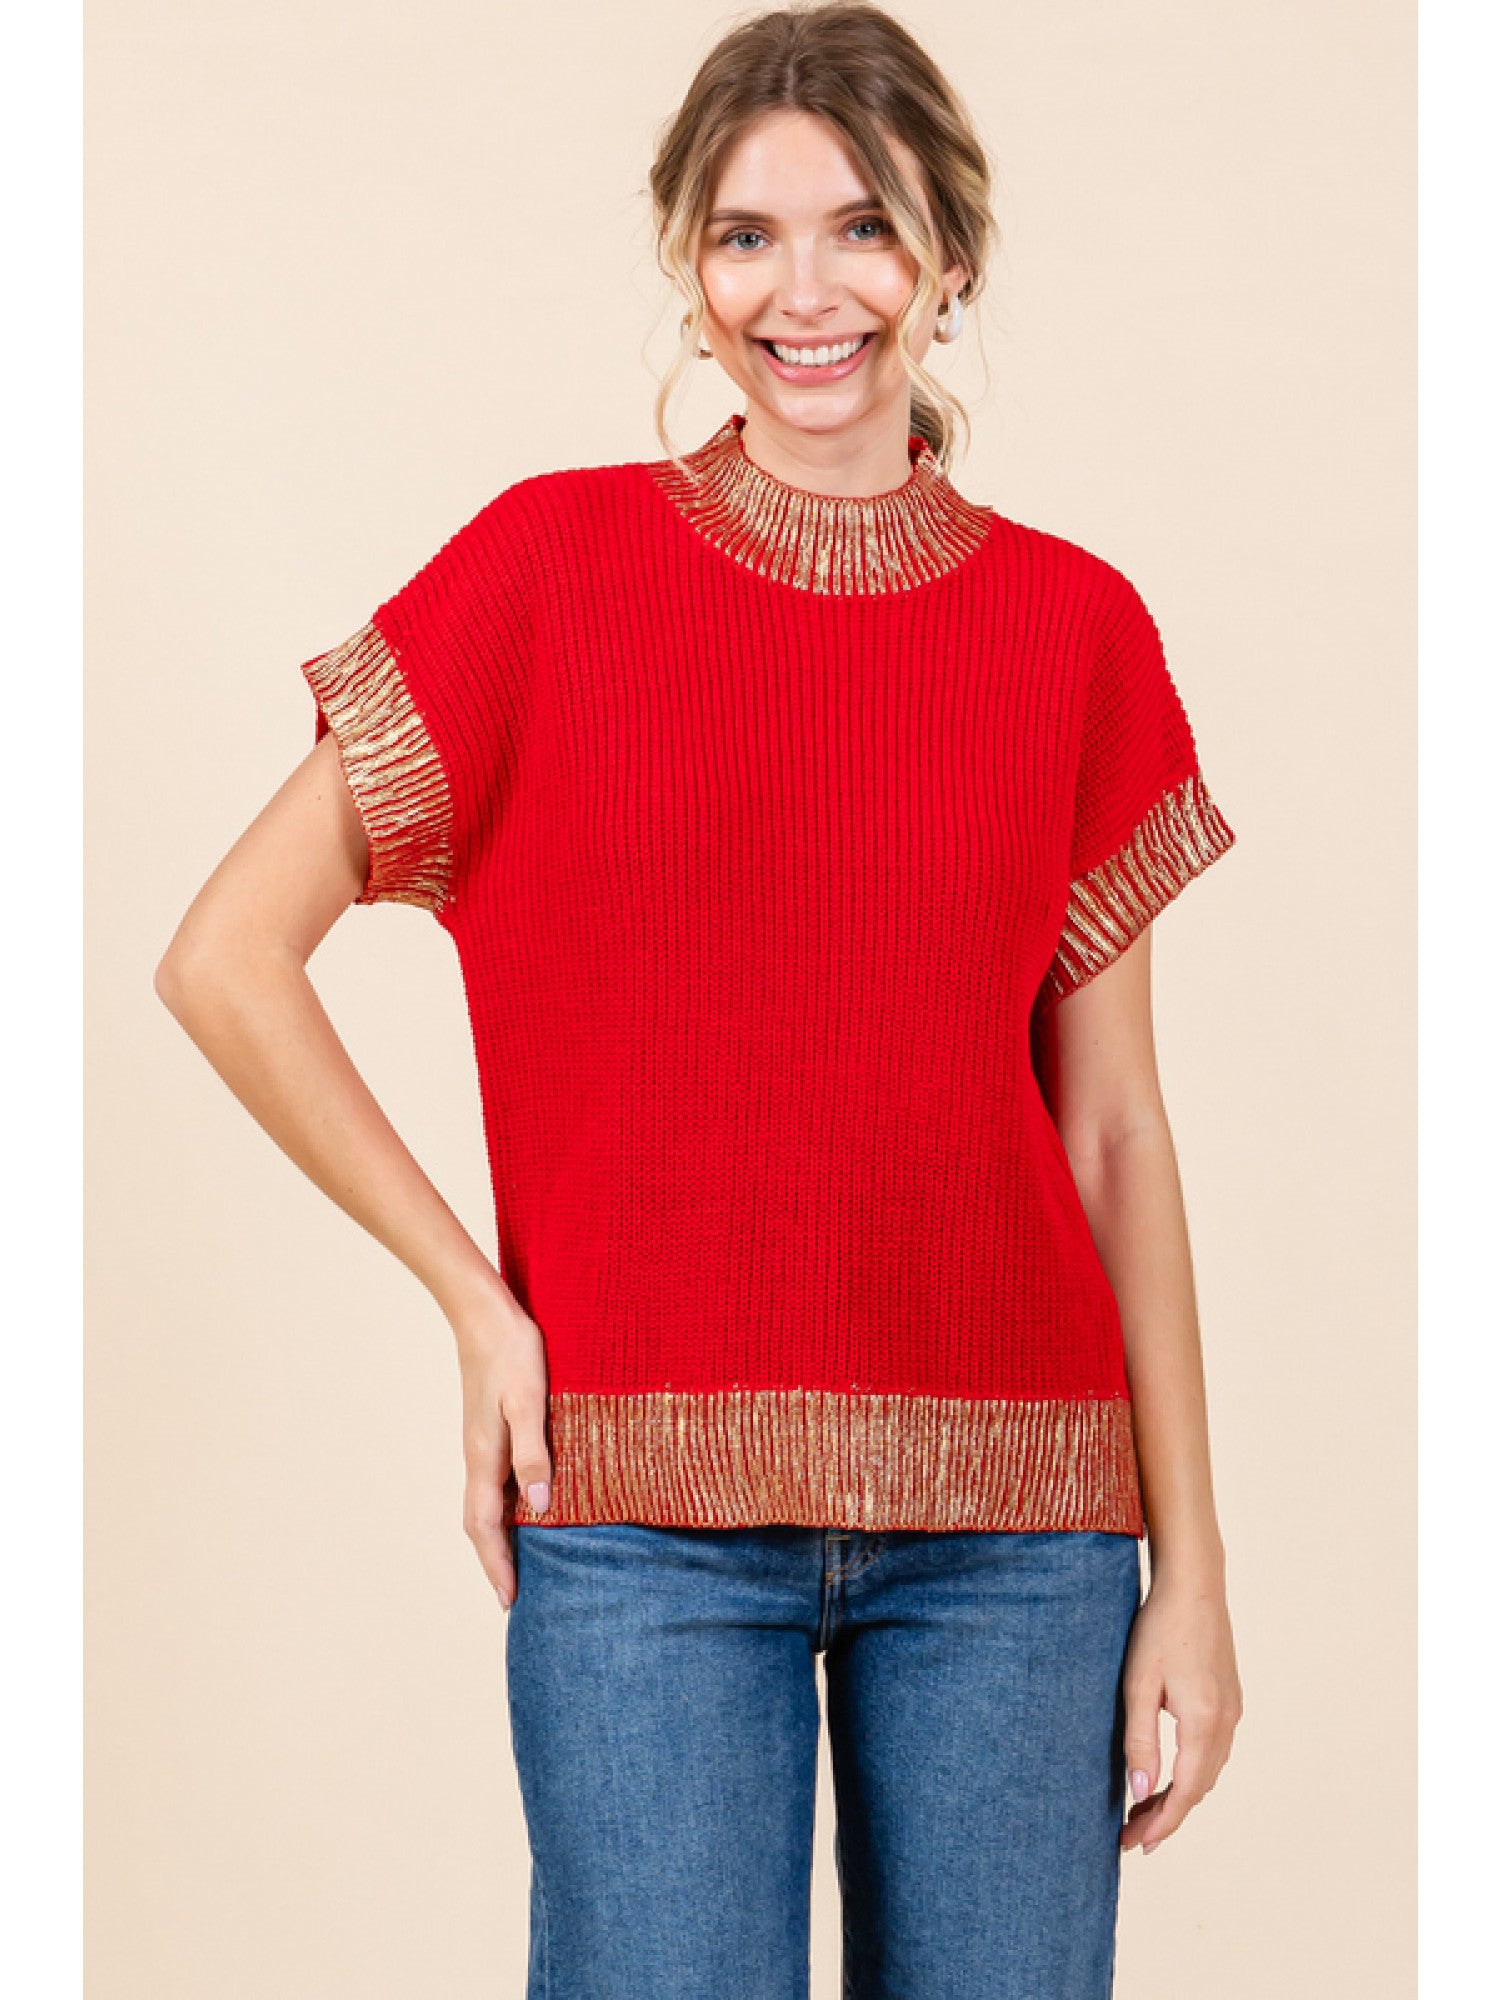 Metallic Detail Solid Knit Top Tomato Red